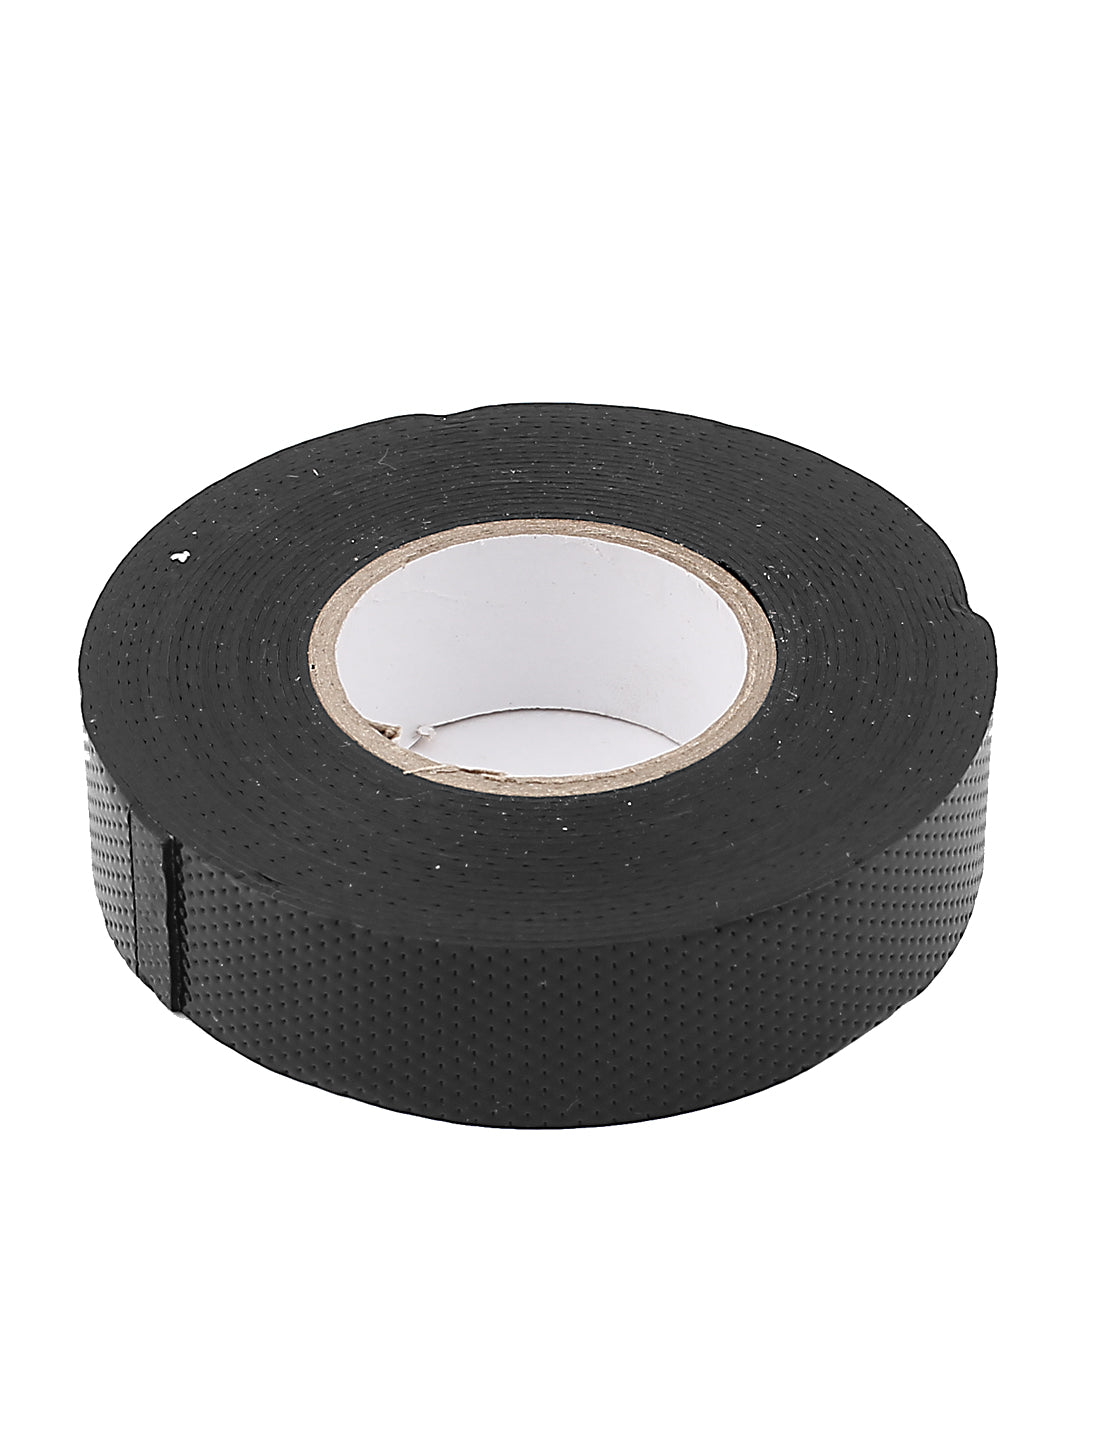 uxcell Uxcell Black Rubber Self Adhesive High Voltage Insulation Electrical Tape 5M Meters